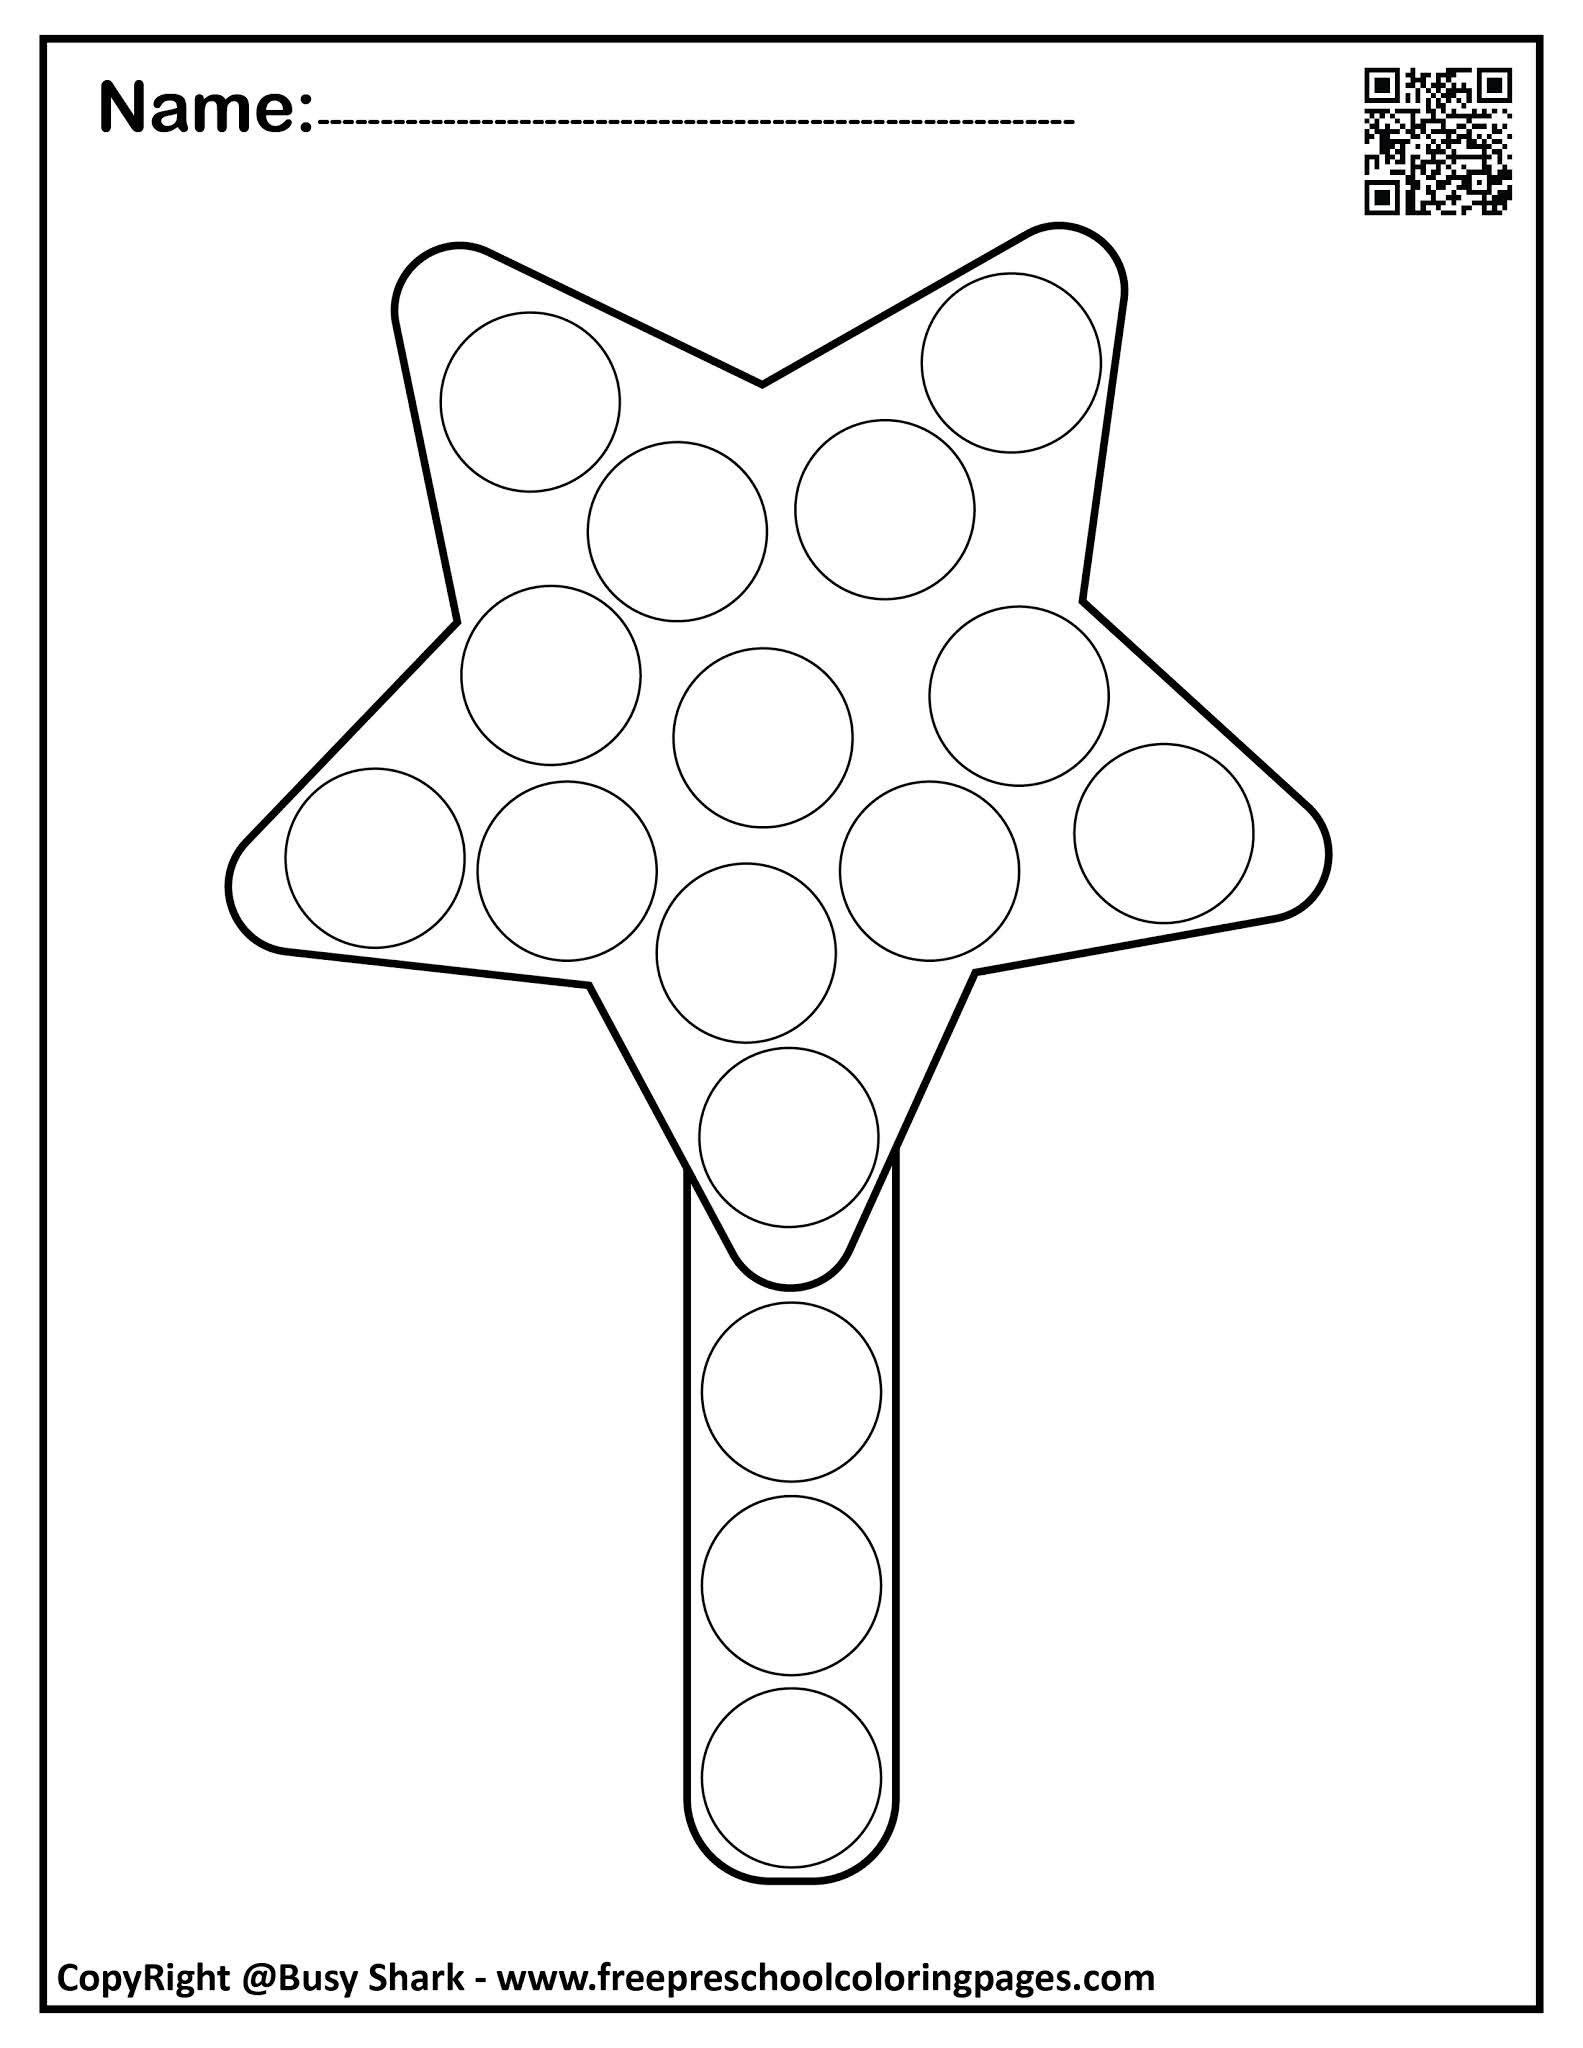 free-printable-dot-marker-pages